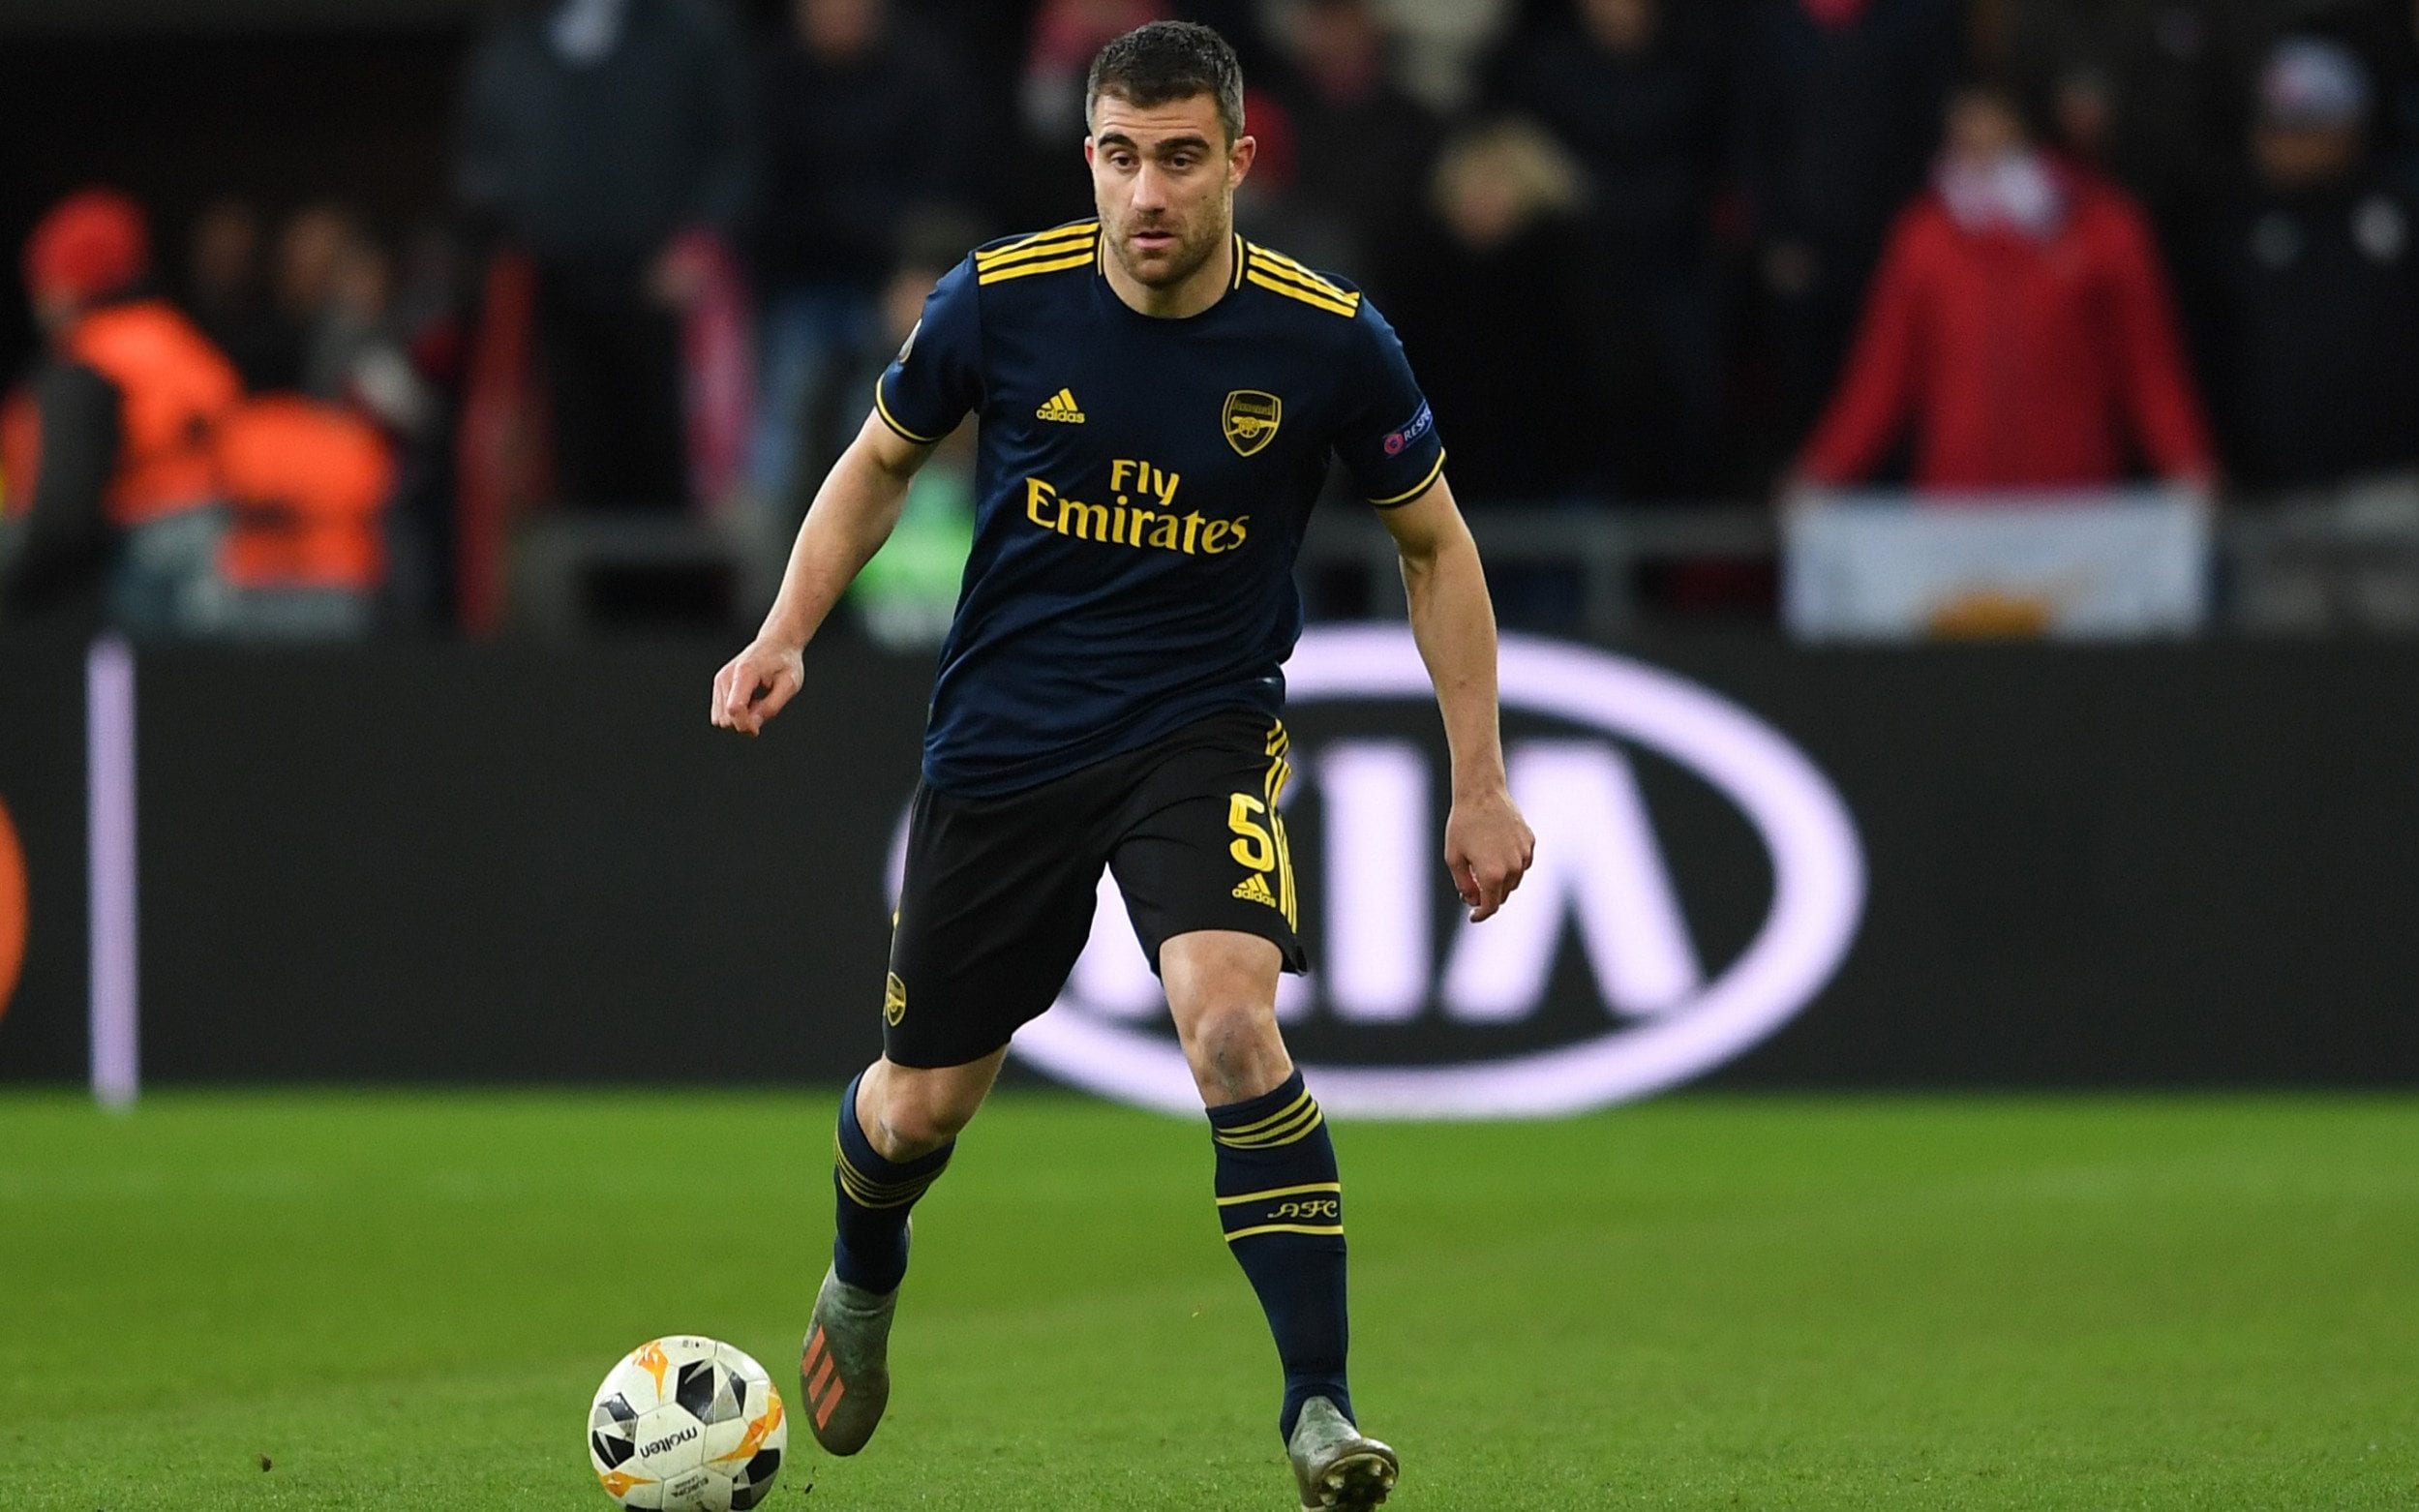 Sokratis Papastathopoulos: Intensity is most important thing in football are ready to explode